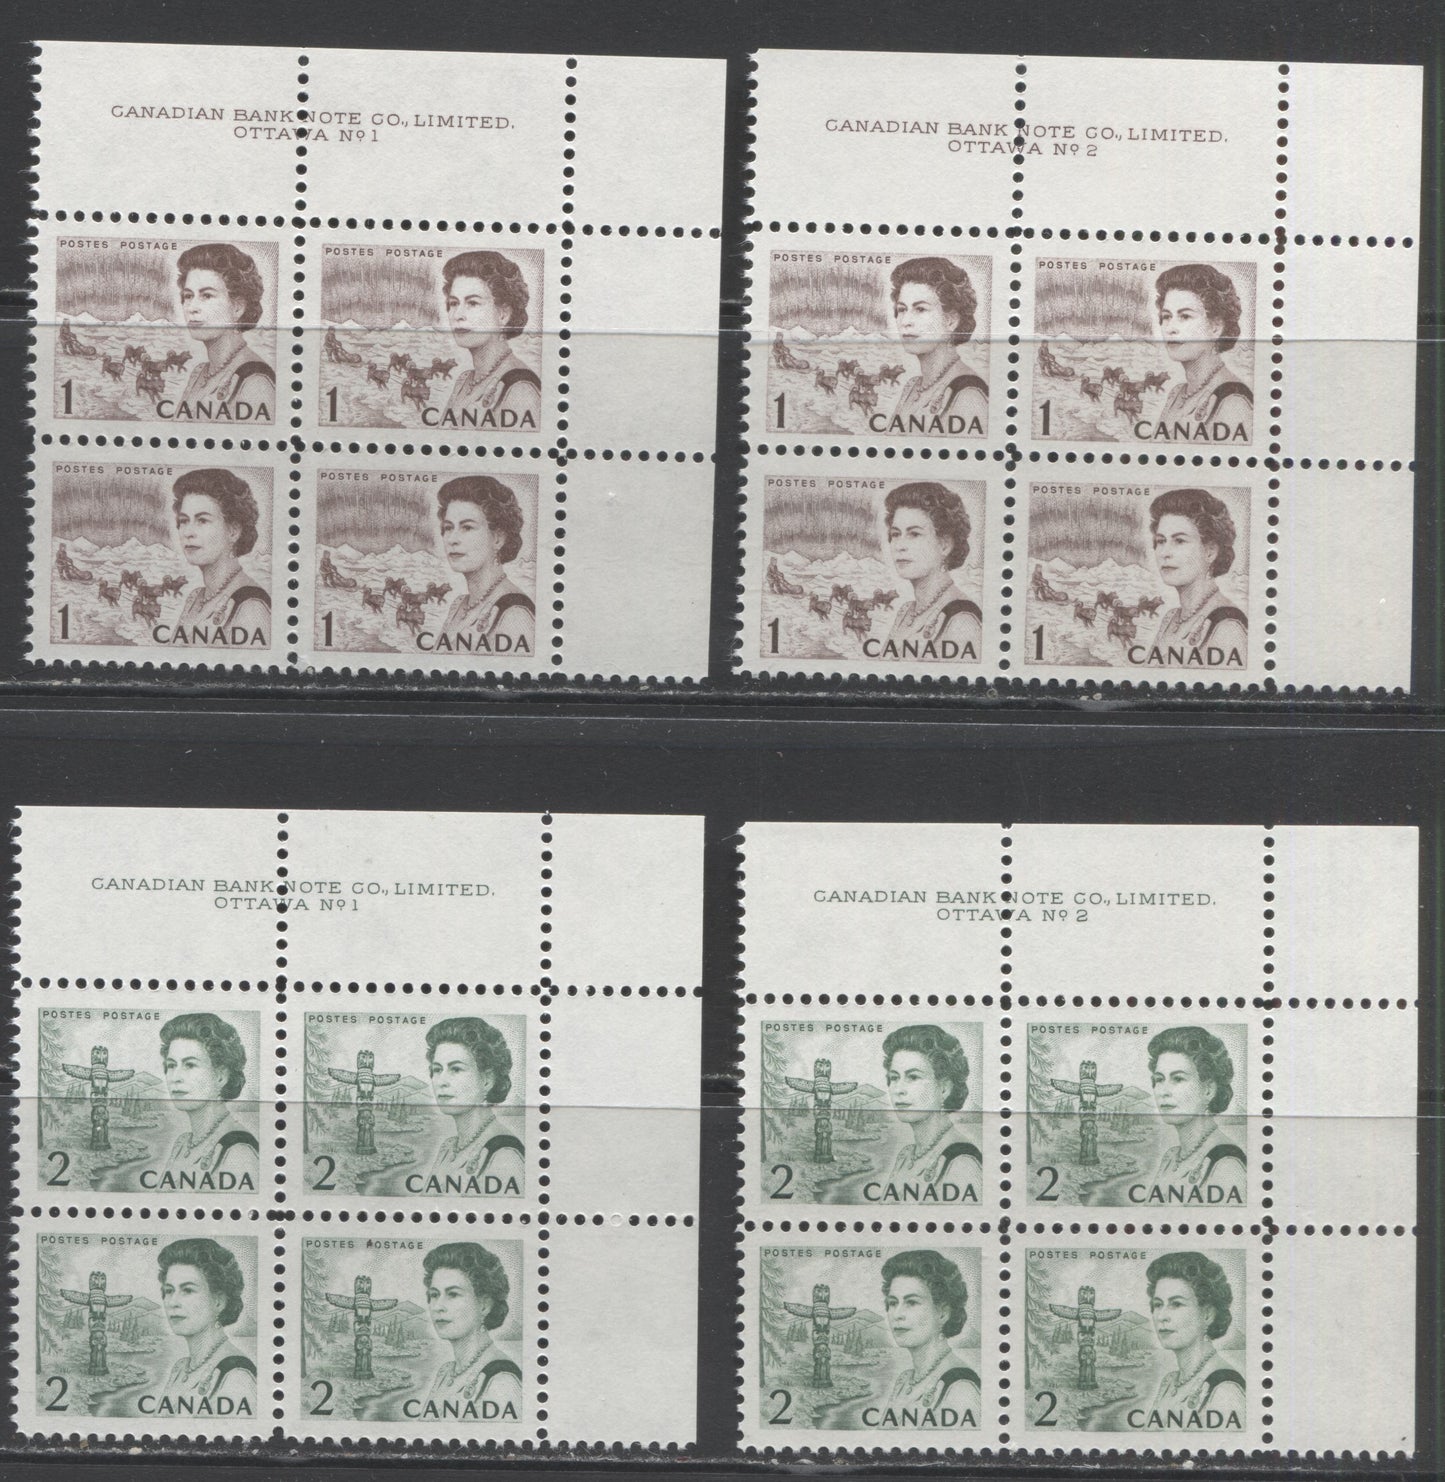 Lot 41 Canada #451-455 1c - 5c Brown - Blue & Red Queen Elizabeth II - Flag & Earth, 1966-1973 Commemoratives & Definitives, 11 VFNH UR and LR Plates 1-3 Blocks Of 4, 451 is on NF Paper and 452 is on DF and DF-fl Paper